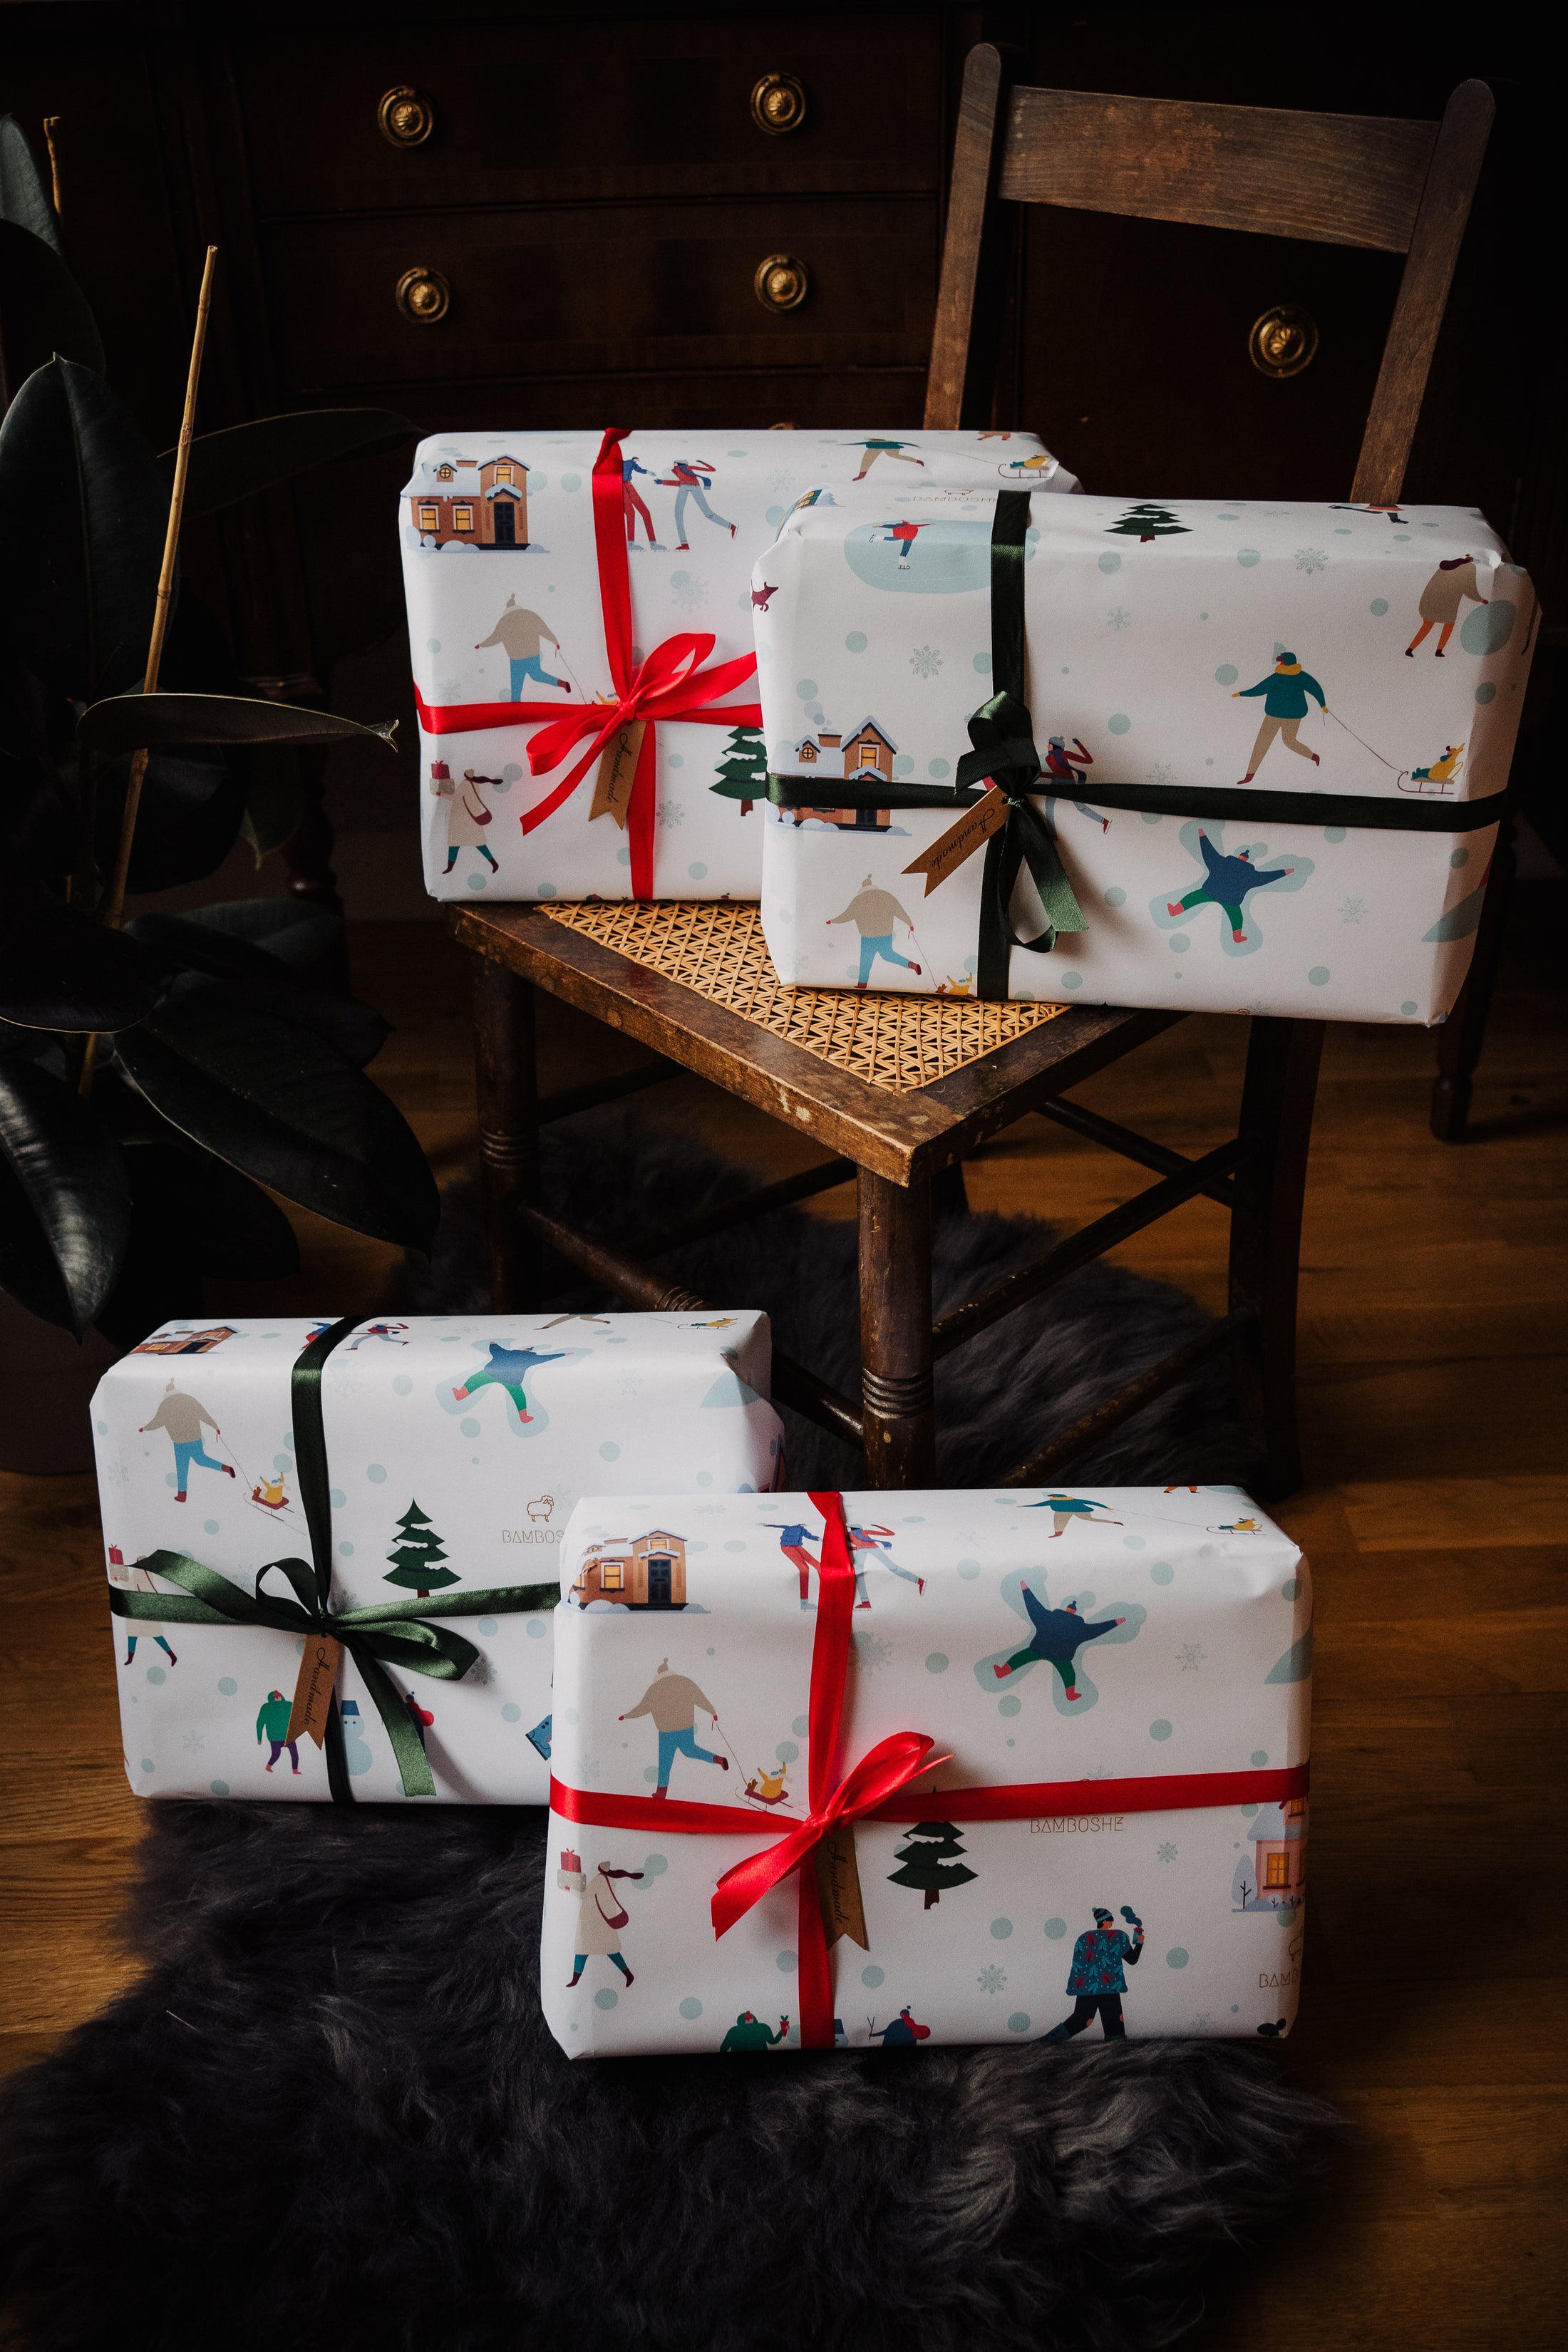 Beautifully packaged gifts with meticulous care, featuring Bamboshe gift wrapping adorned with green and red ribbons.